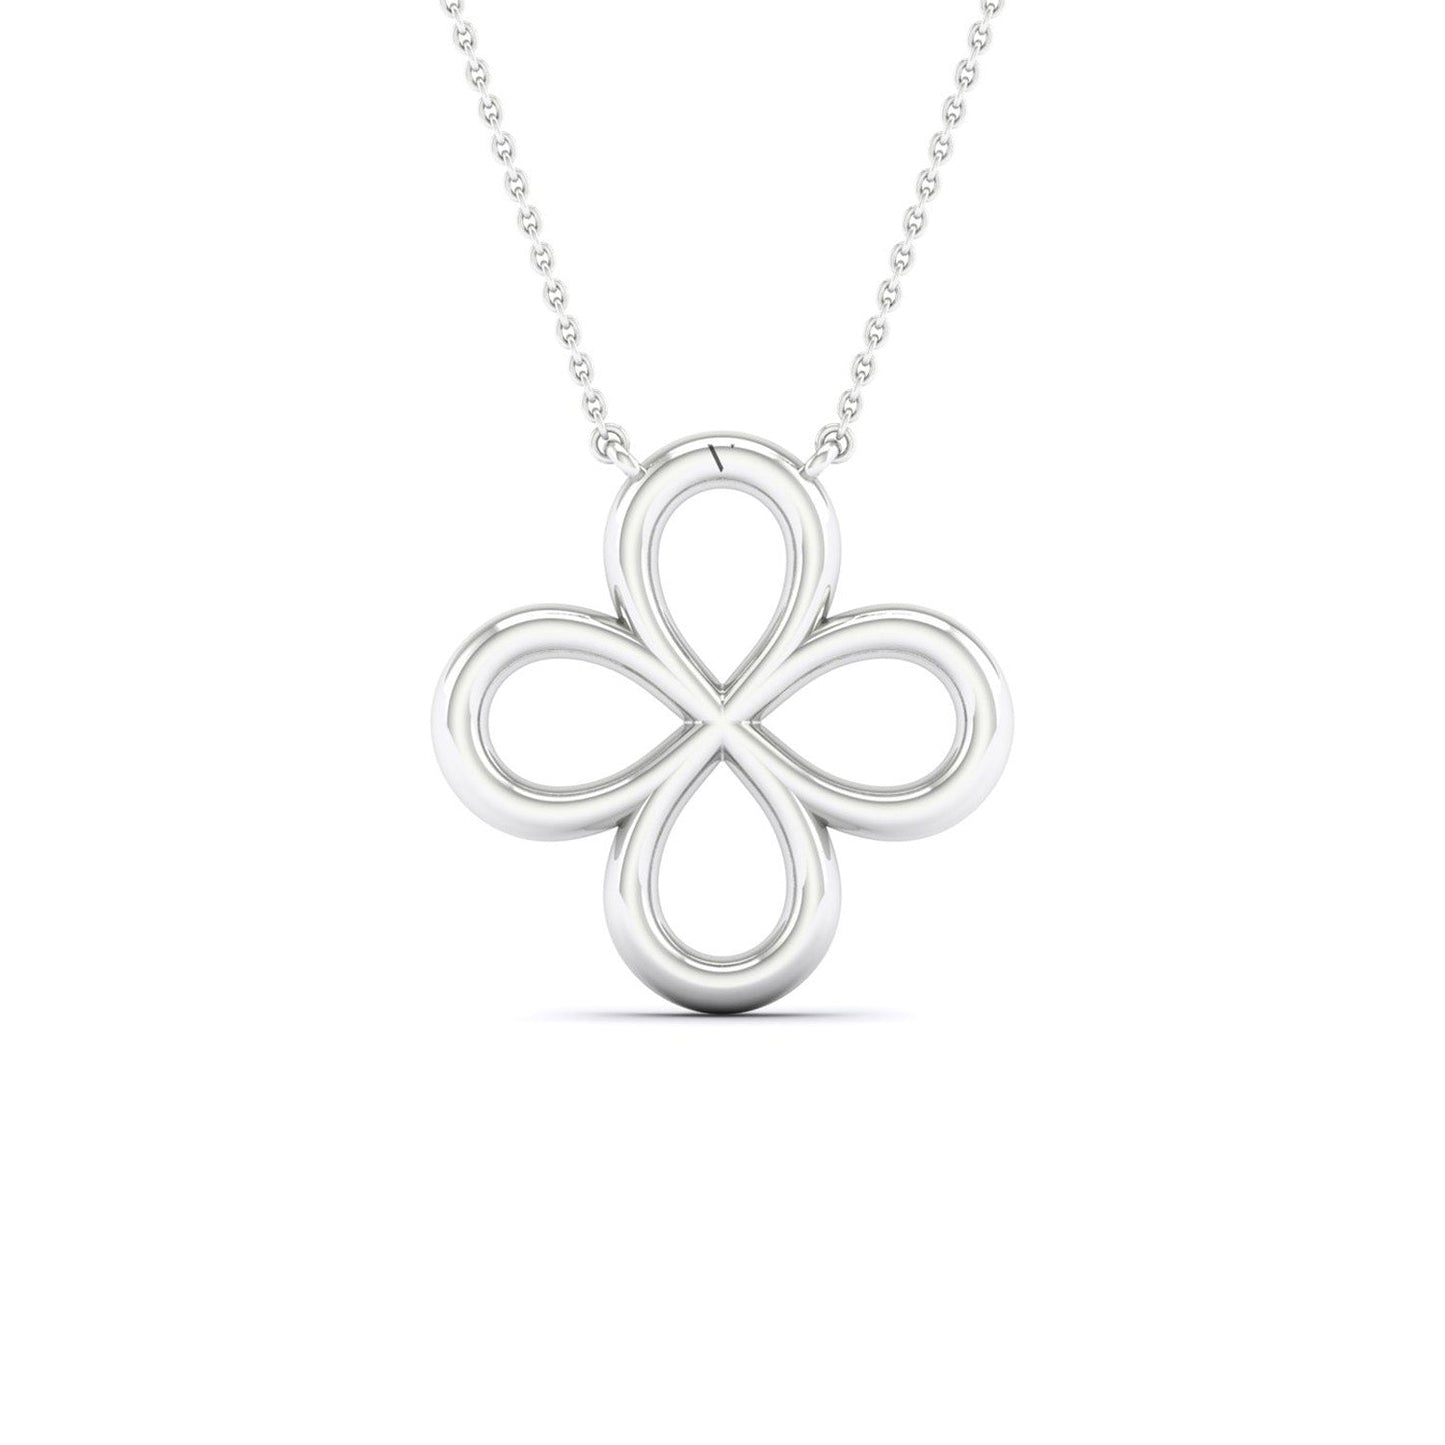 Infinity-Clover Silhouette Necklace_Product Angle_1/4 - 3